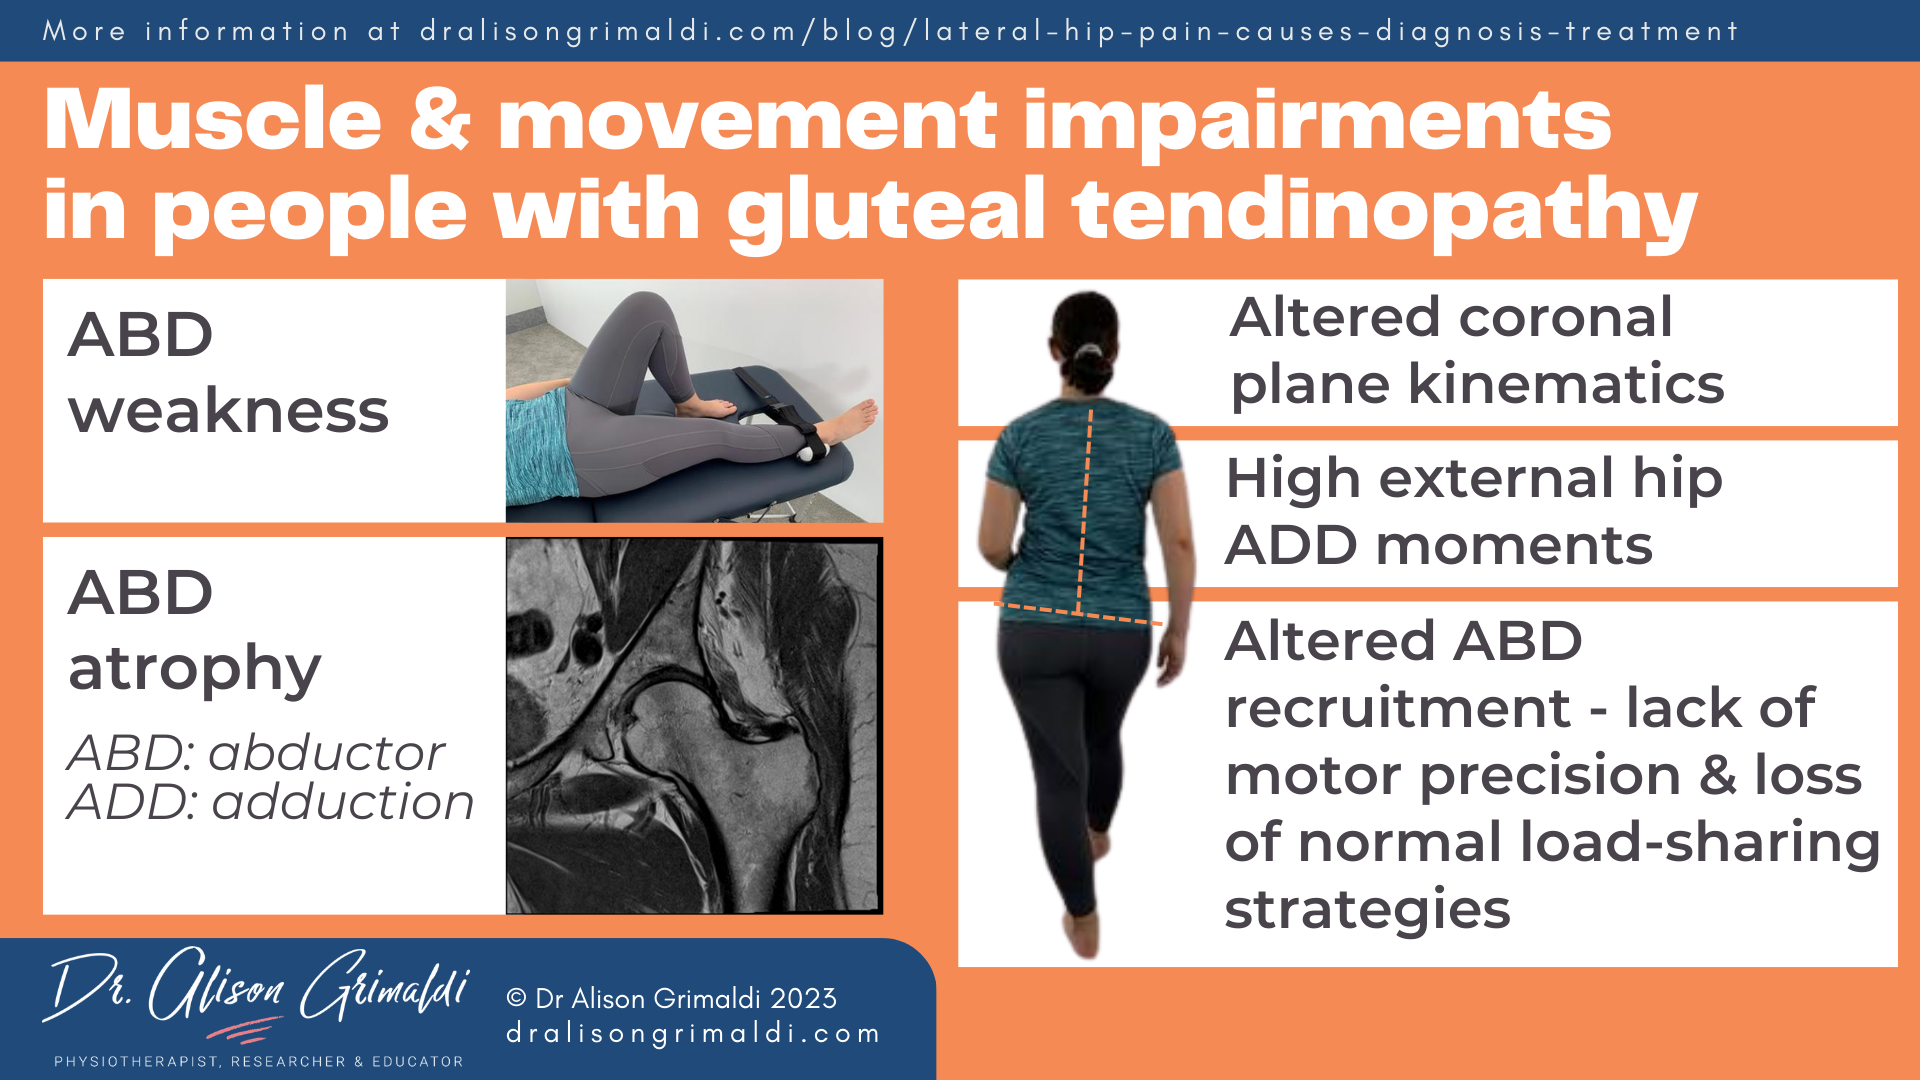 Muscle-&-movement-impairments-in-people-with-gluteal-tendinopathy